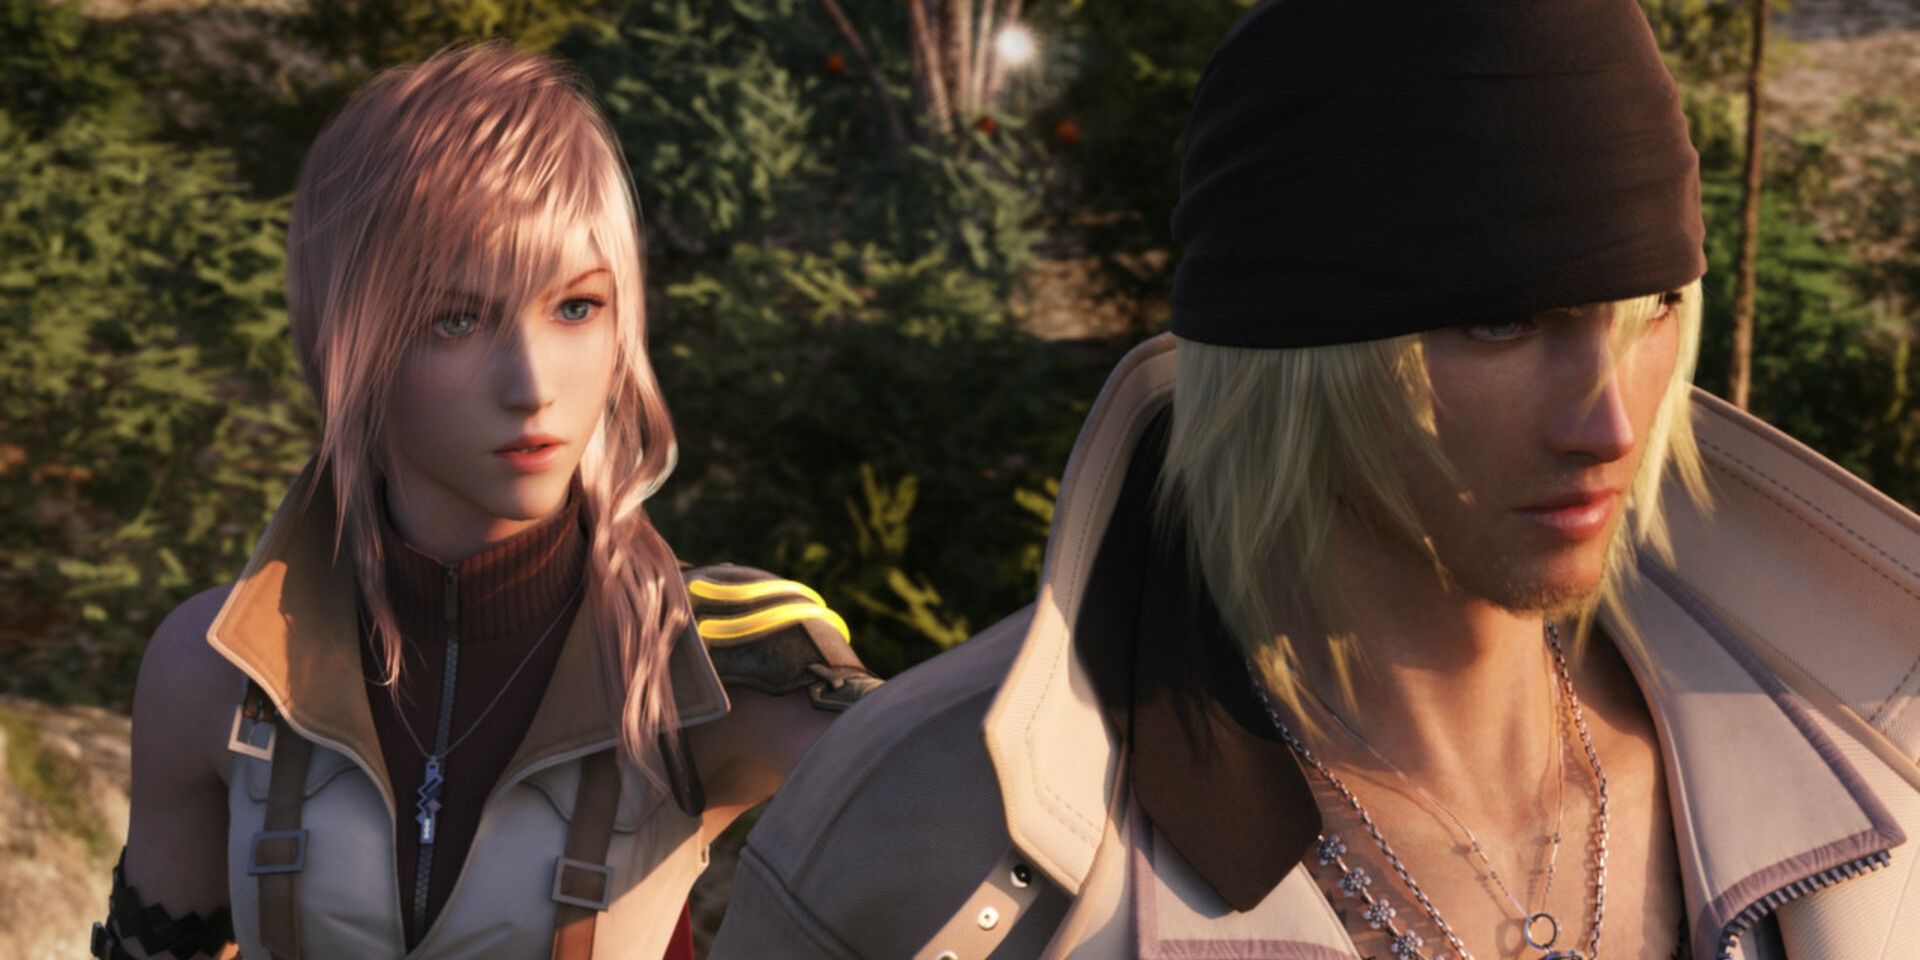 Final Fantasy 13's Lightning Farron and Snow Villiers near a forest on Gran Pulse